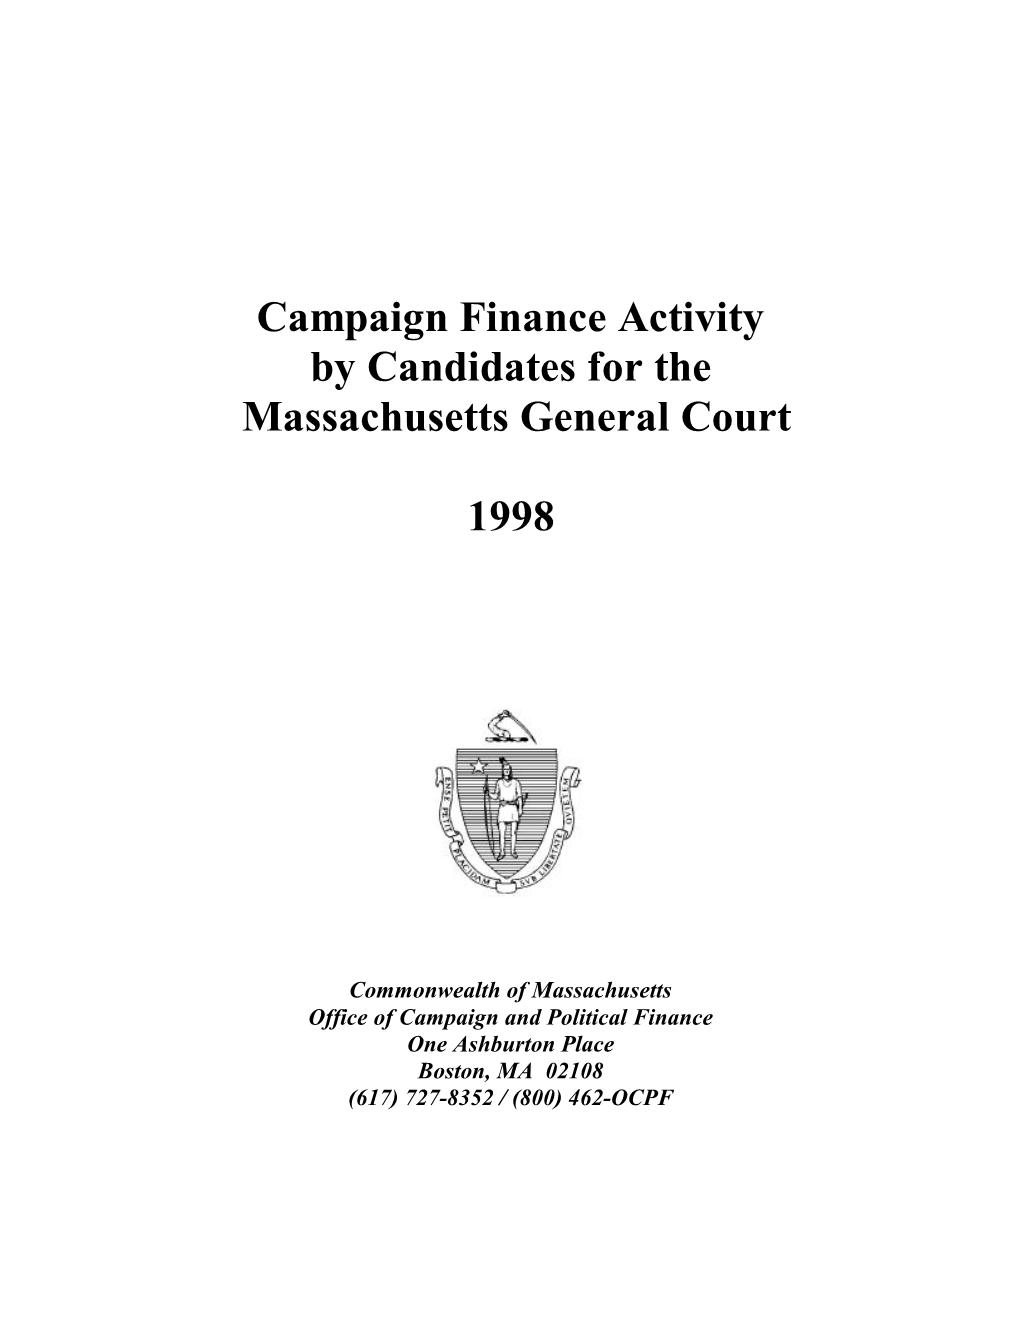 Campaign Finance Activity by Candidates for the Massachusetts General Court